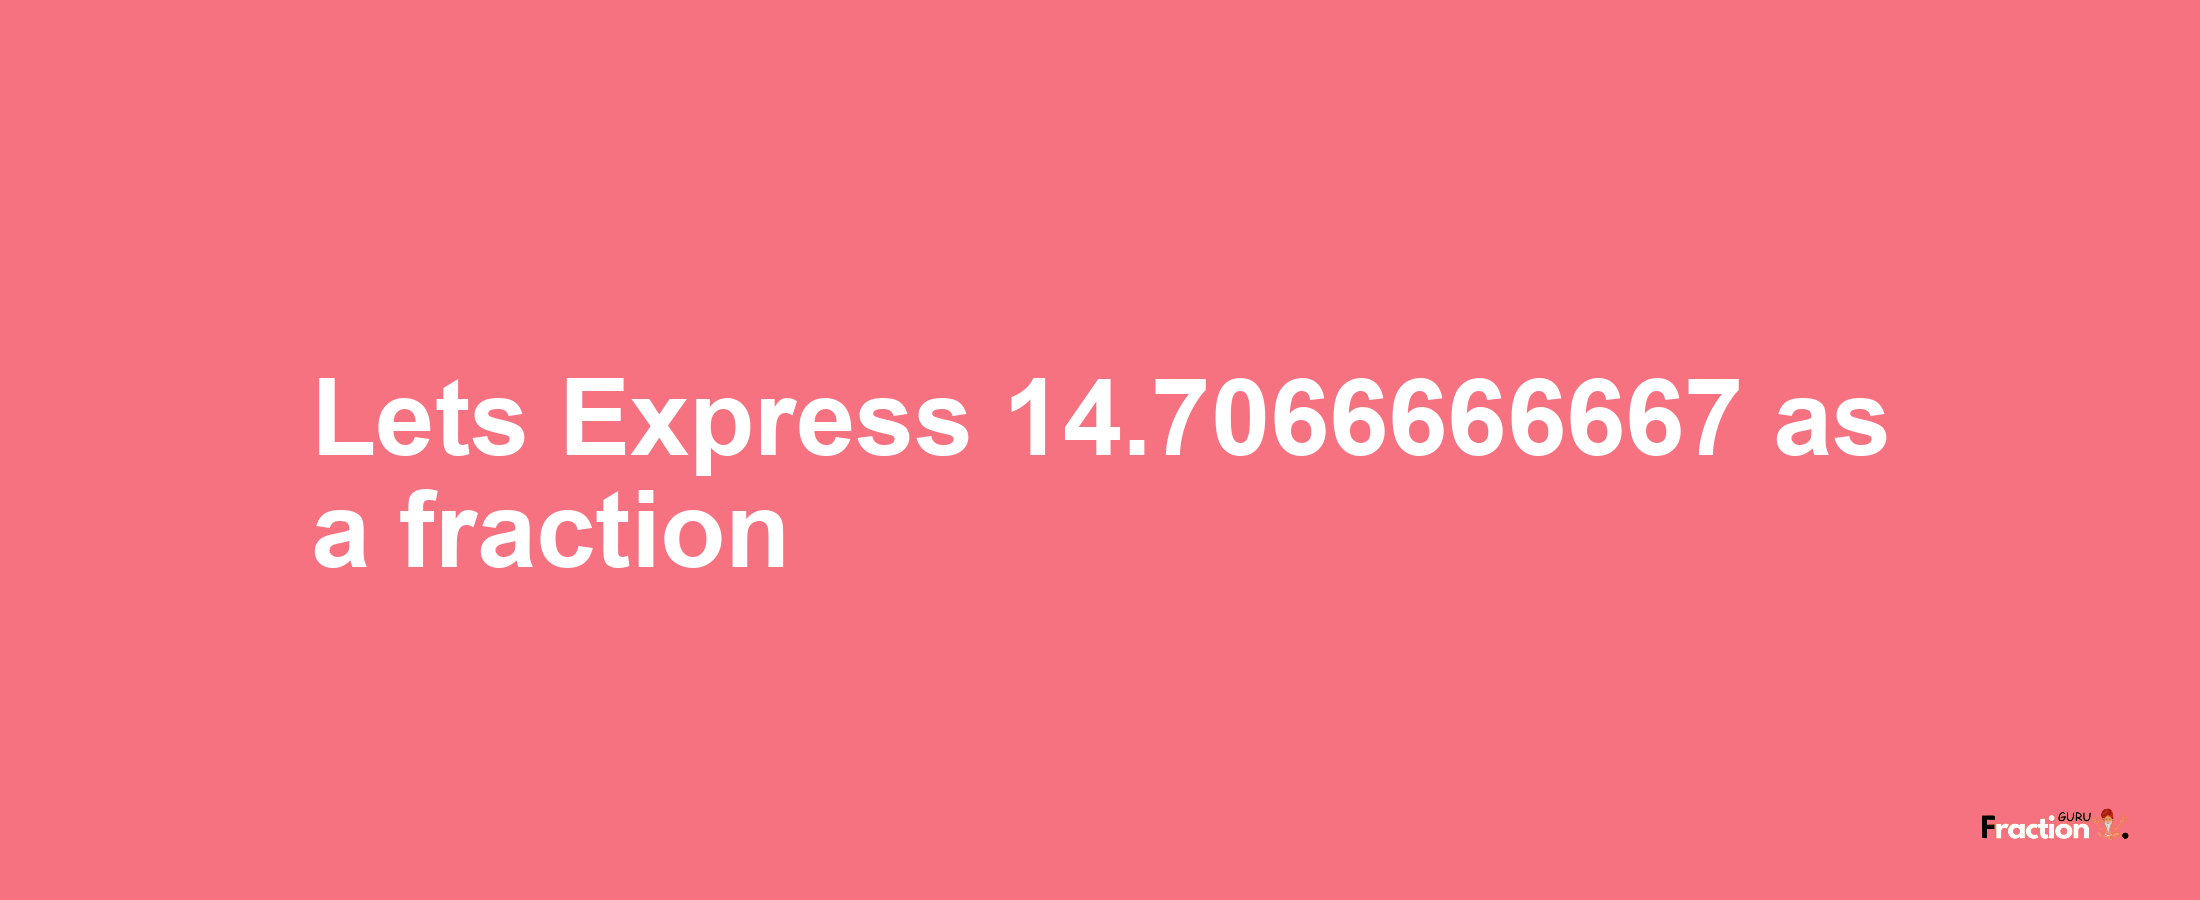 Lets Express 14.7066666667 as afraction